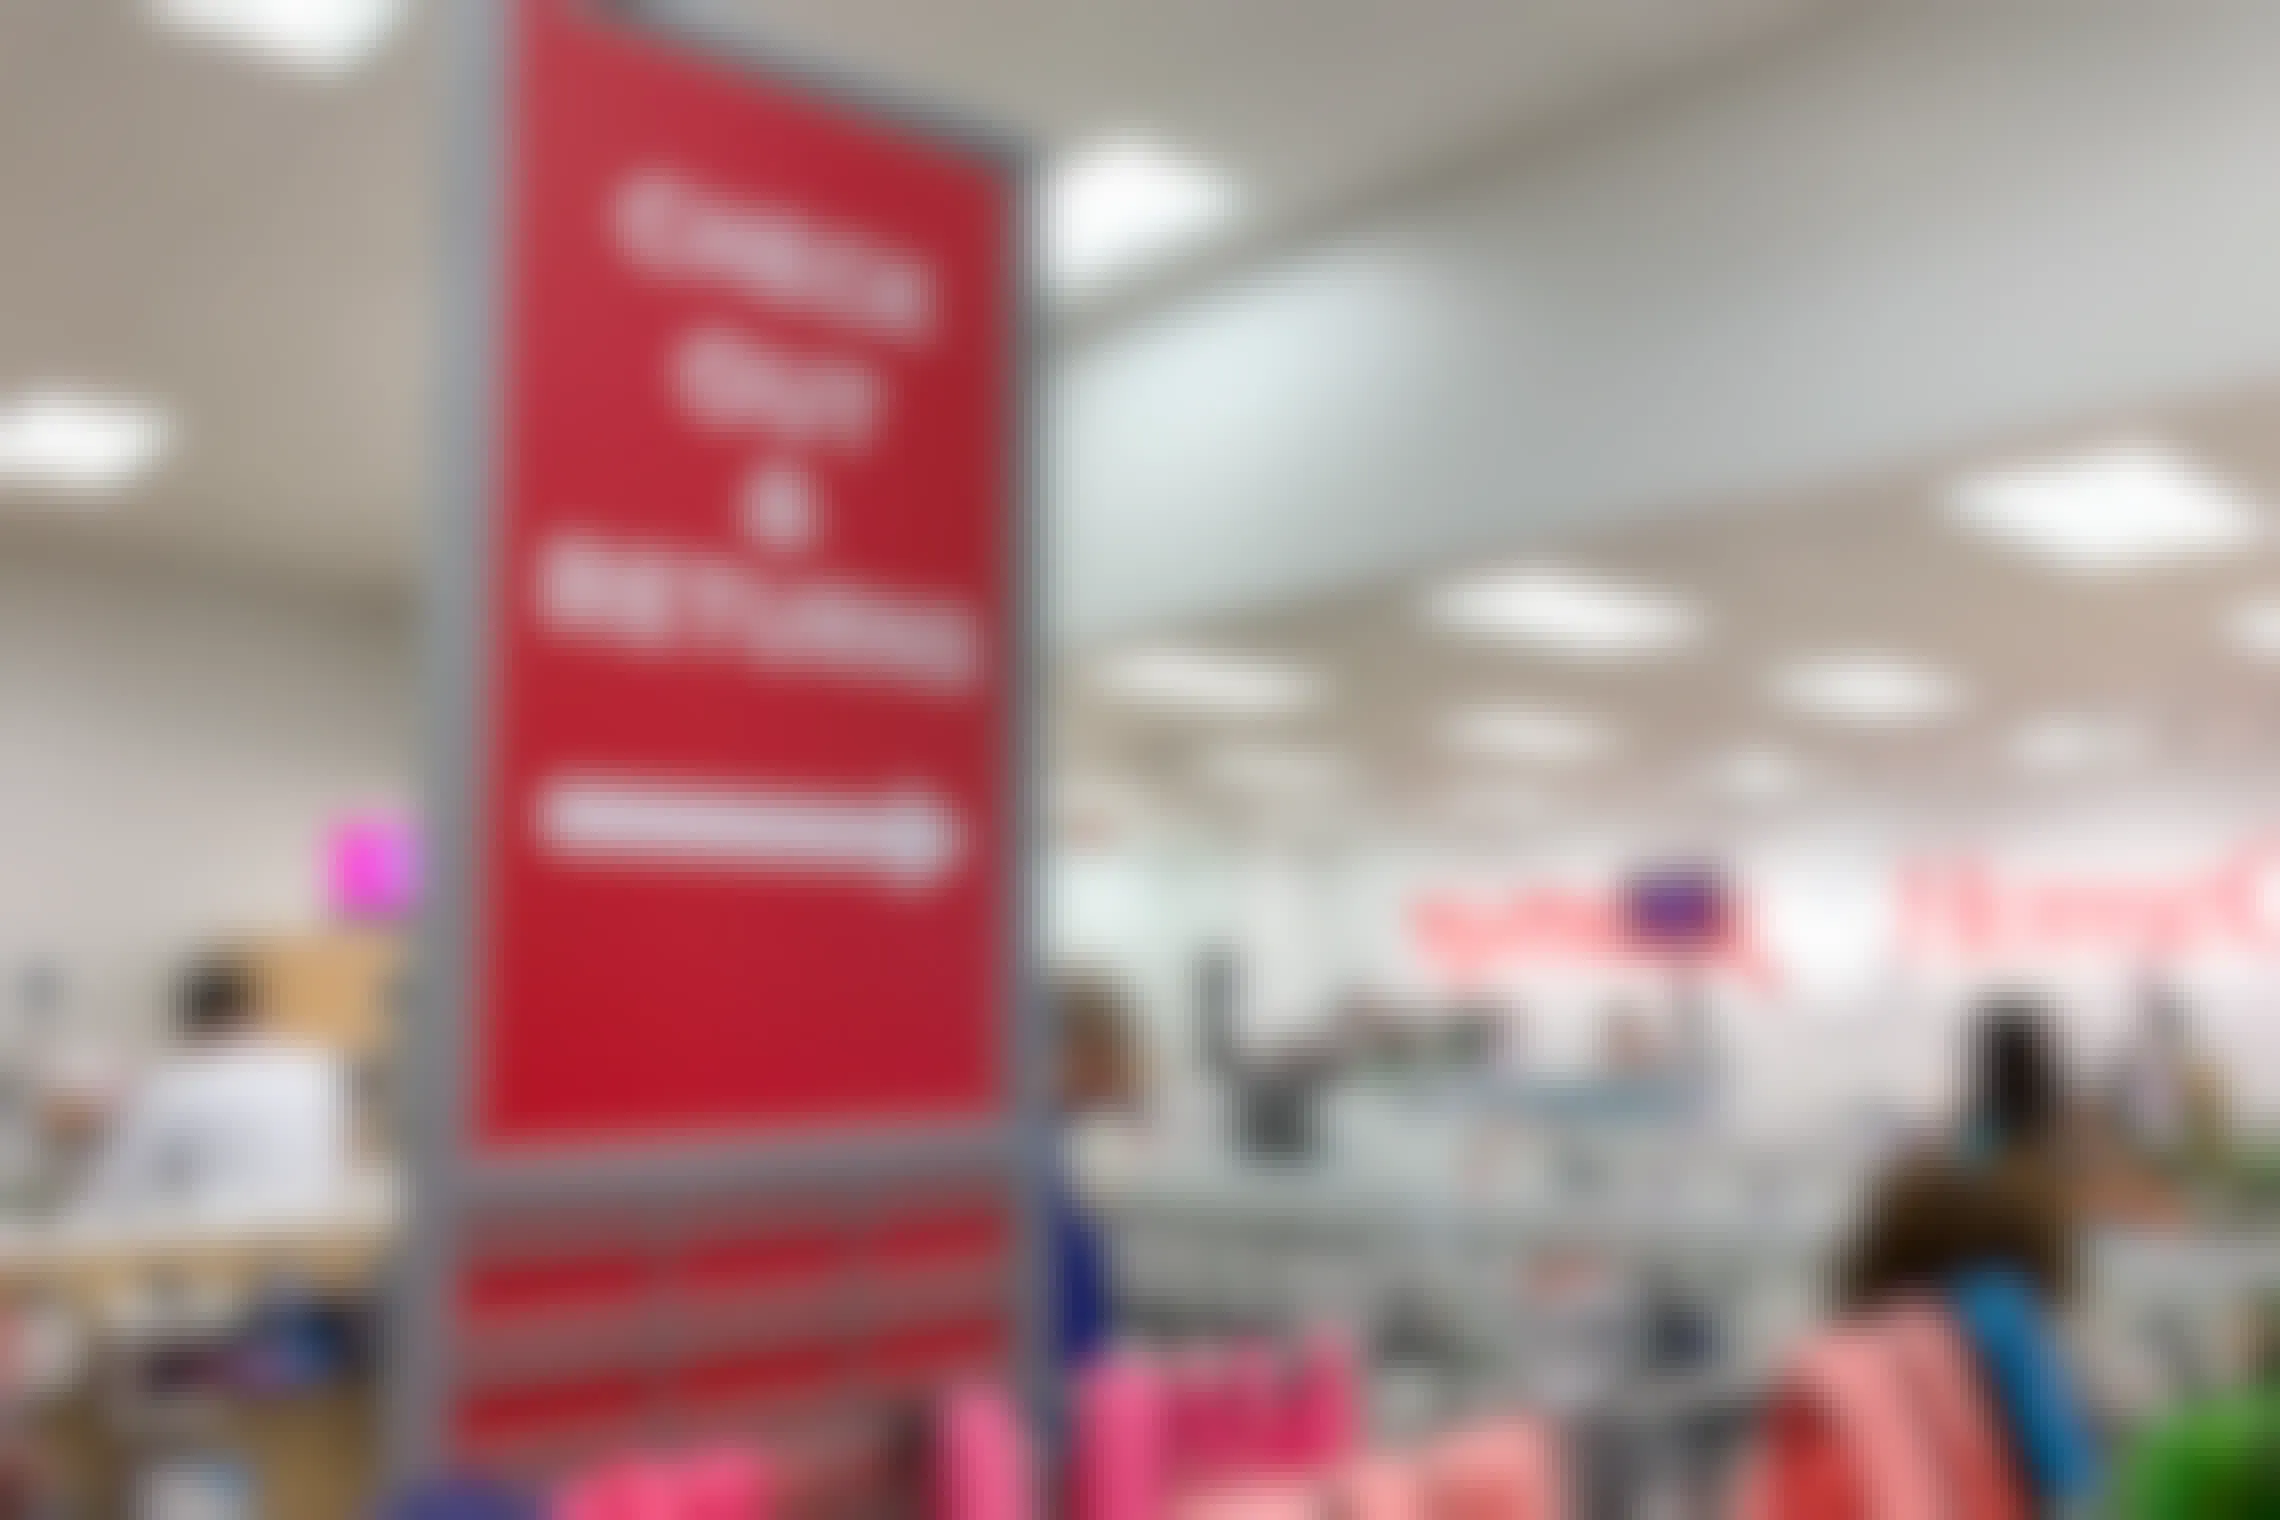 Check out and T.J.Maxx returns sign with people standing in line